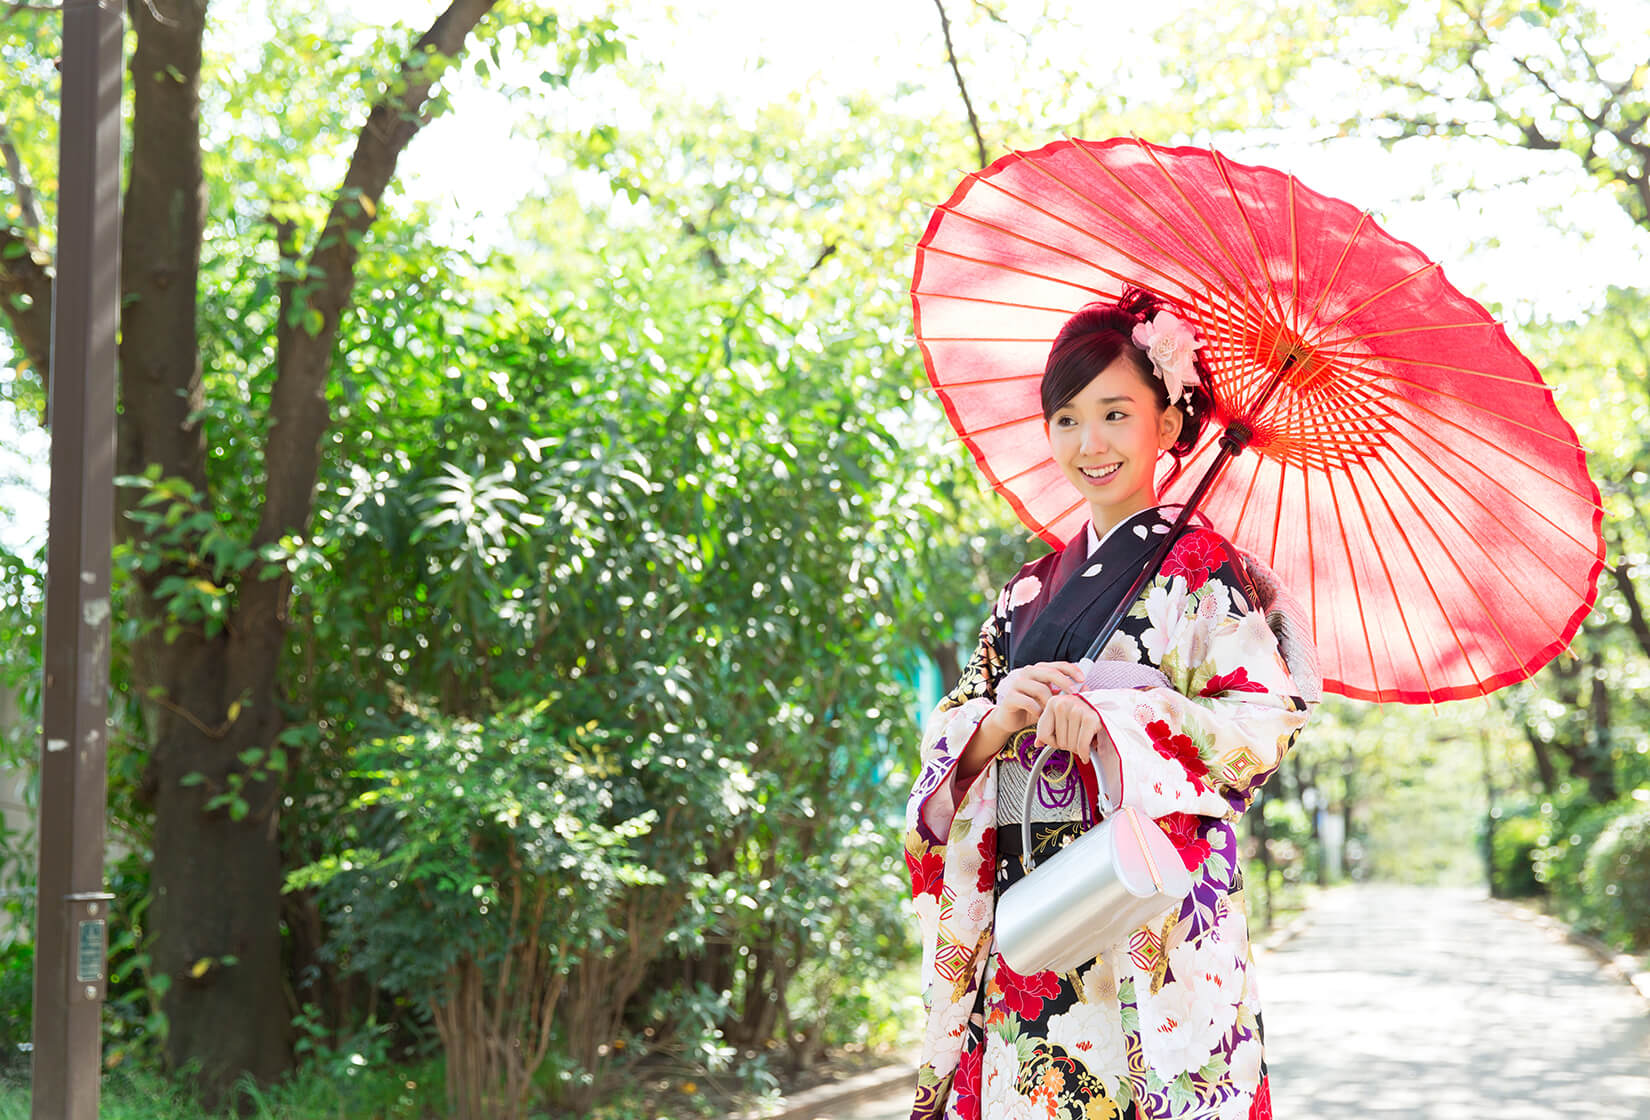 Getting to your Kimono | Motto Media - Japanese Culture & Living Japan